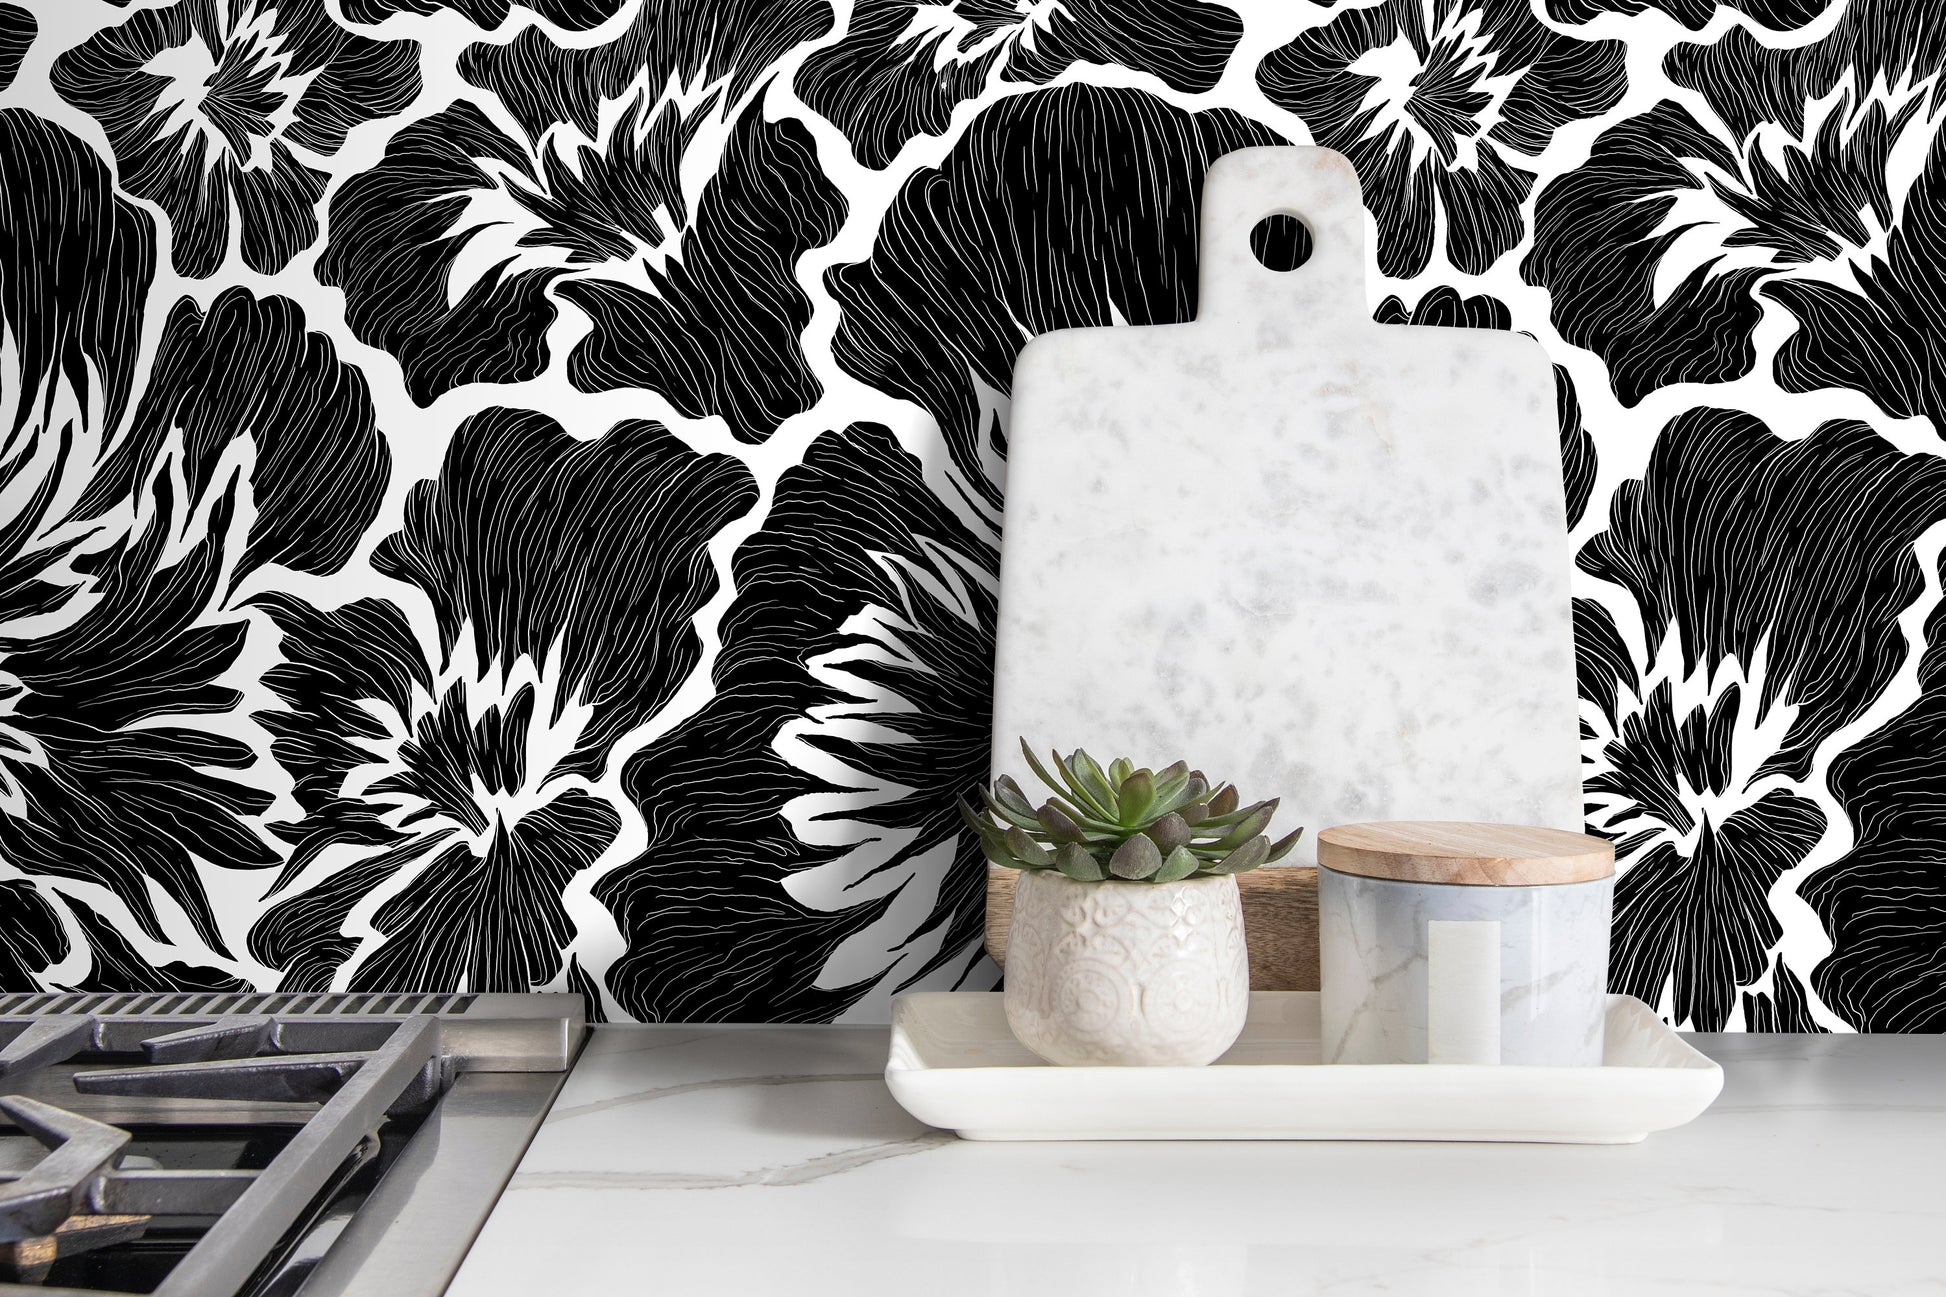 Black and White Bold Floral Wallpaper / Peel and Stick Wallpaper Removable Wallpaper Home Decor Wall Art Wall Decor Room Decor - C677